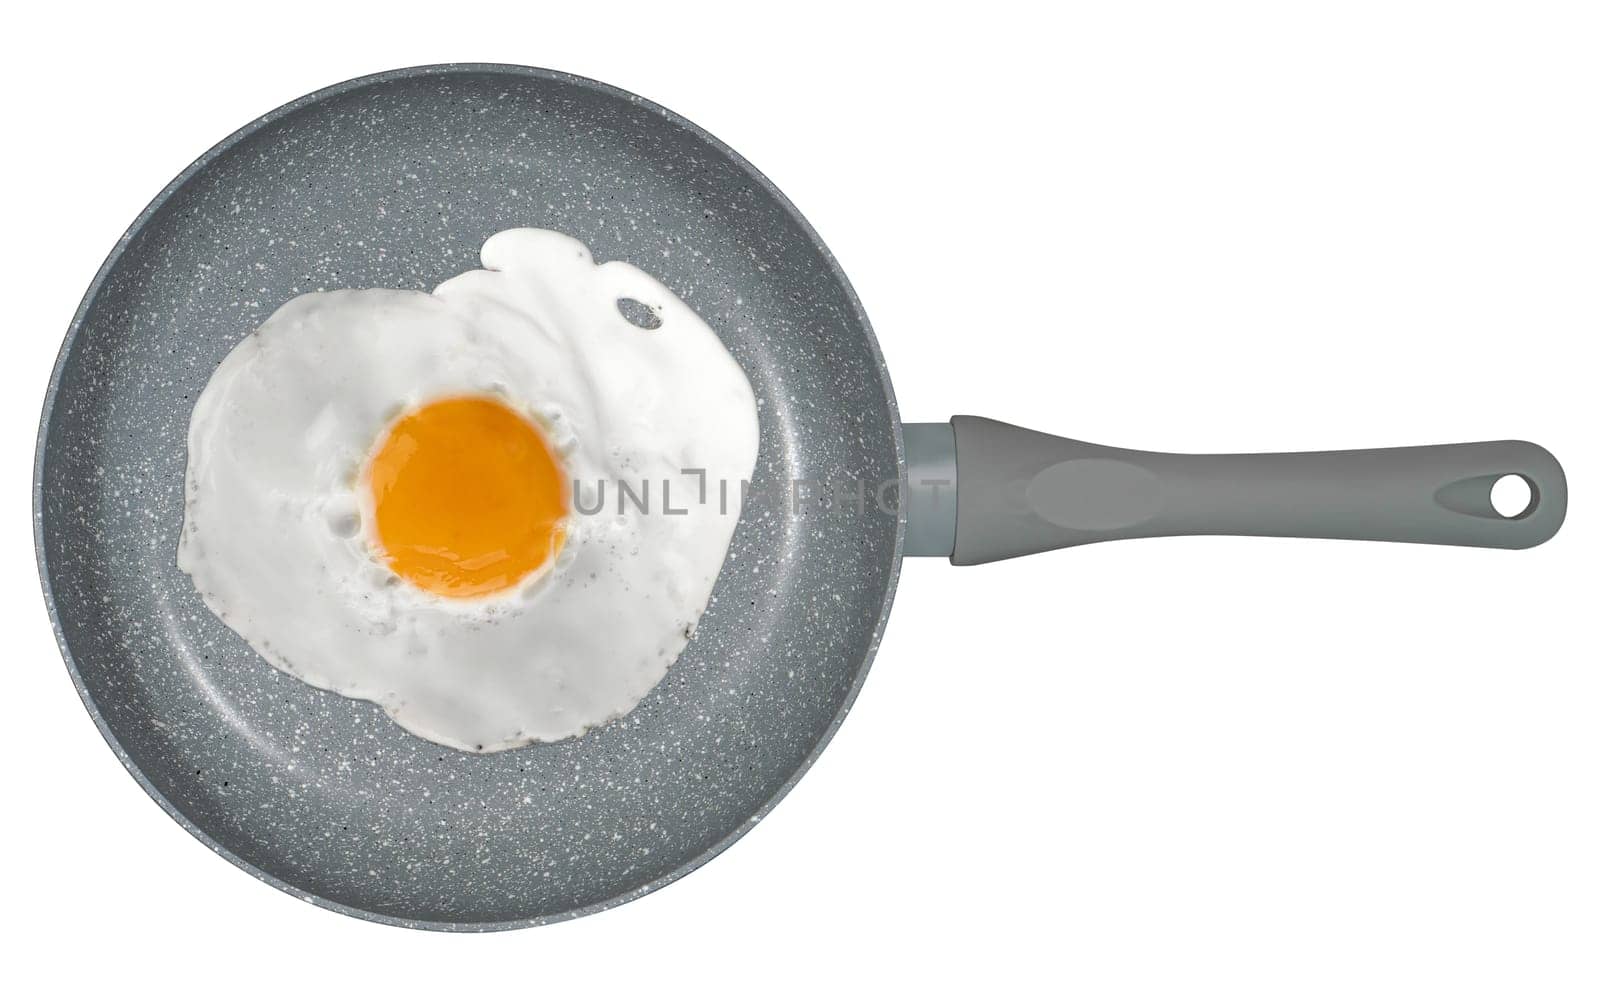 scrambled eggs on a frying pan, on a white background in isolation